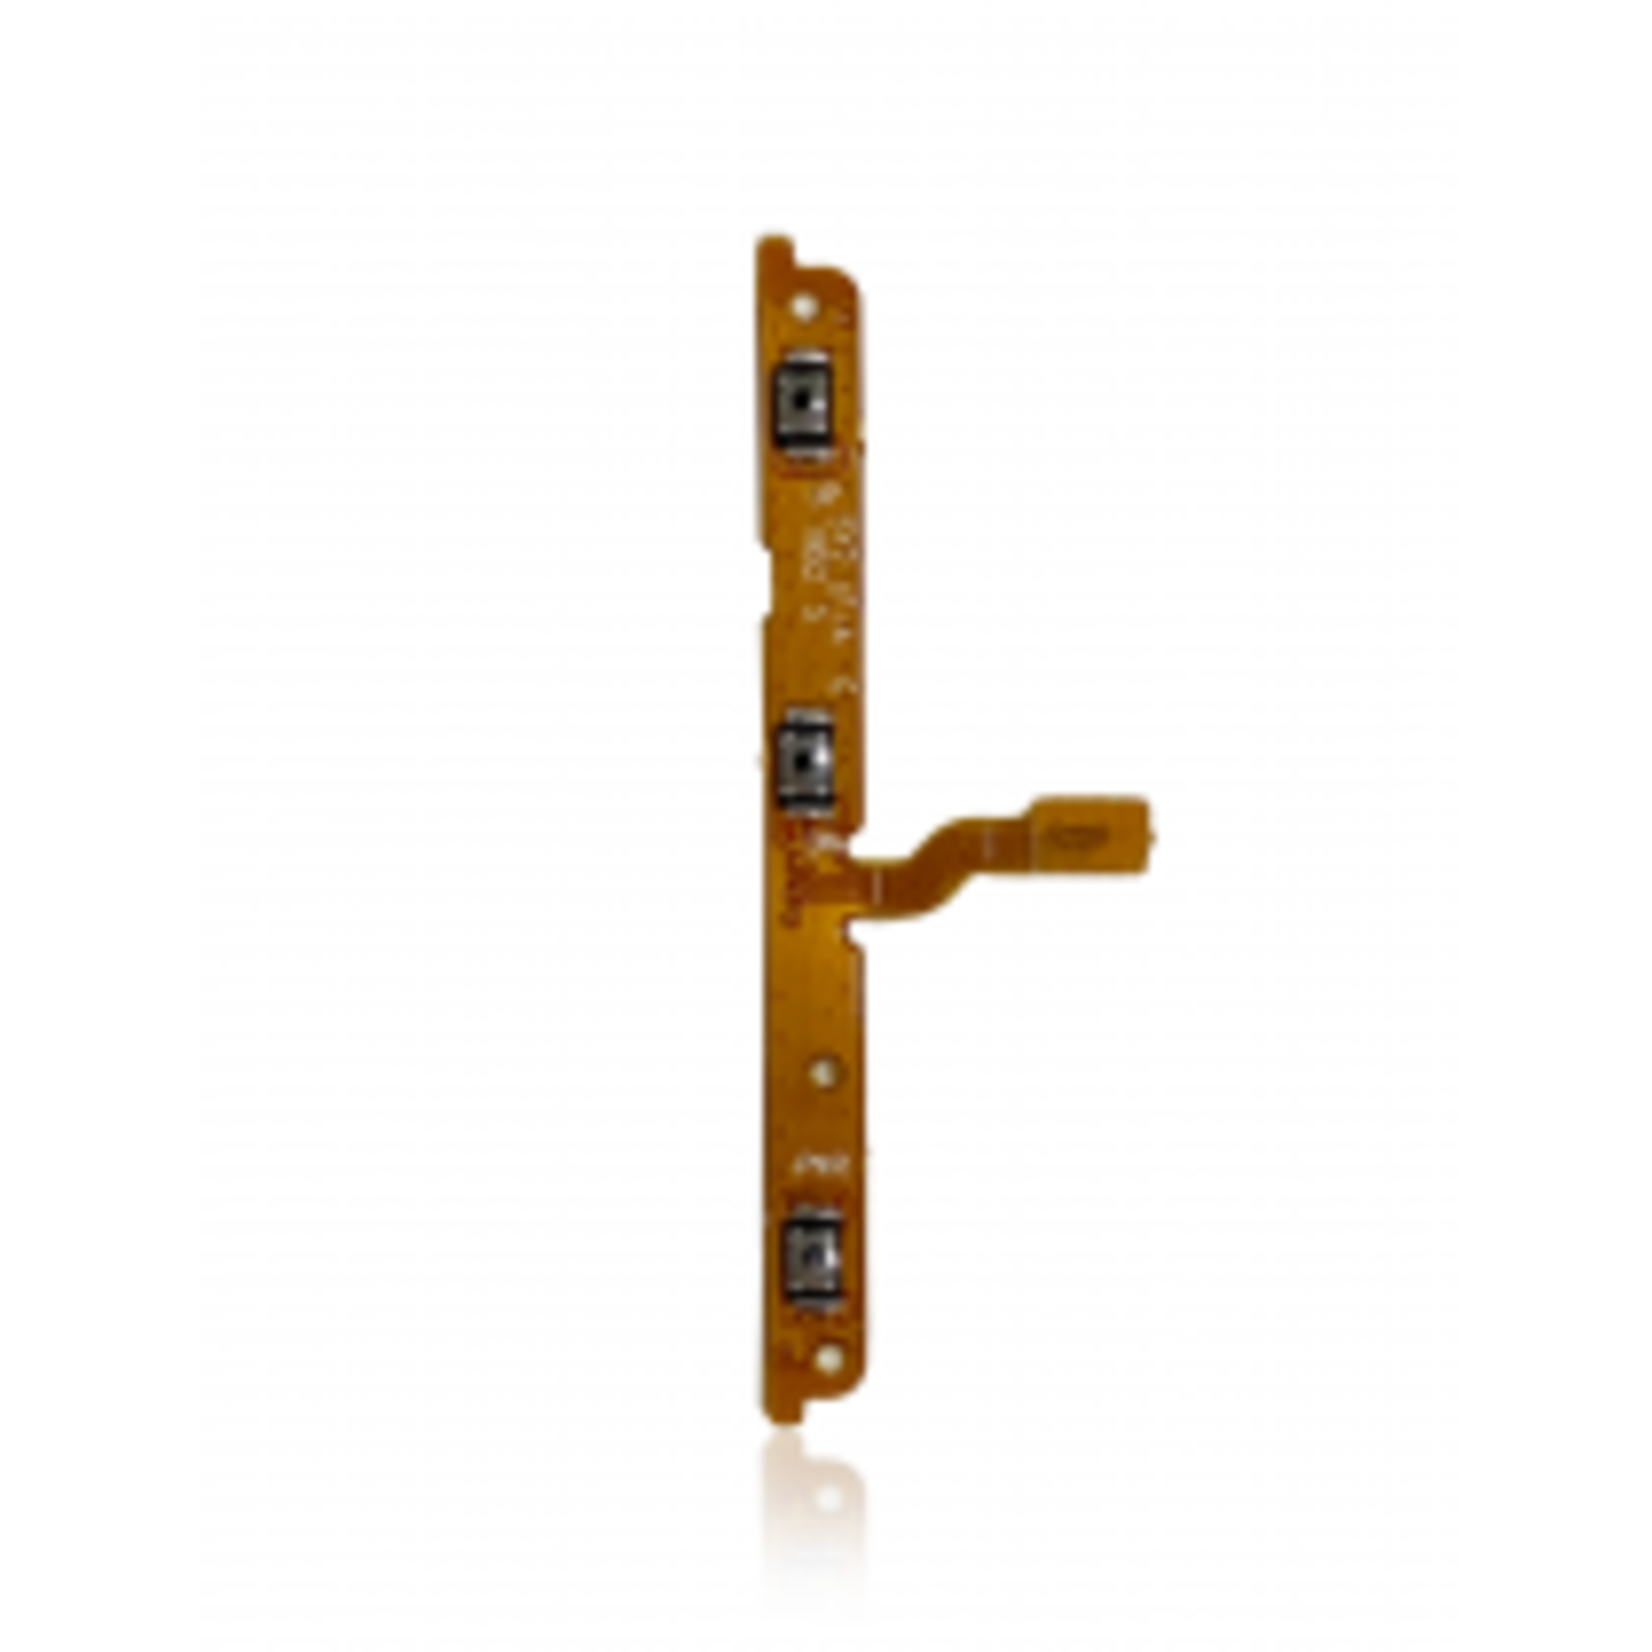 Samsung POWER AND VOLUME BUTTON FLEX CABLE COMPATIBLE FOR SAMSUNG GALAXY S20 / S20 PLUS